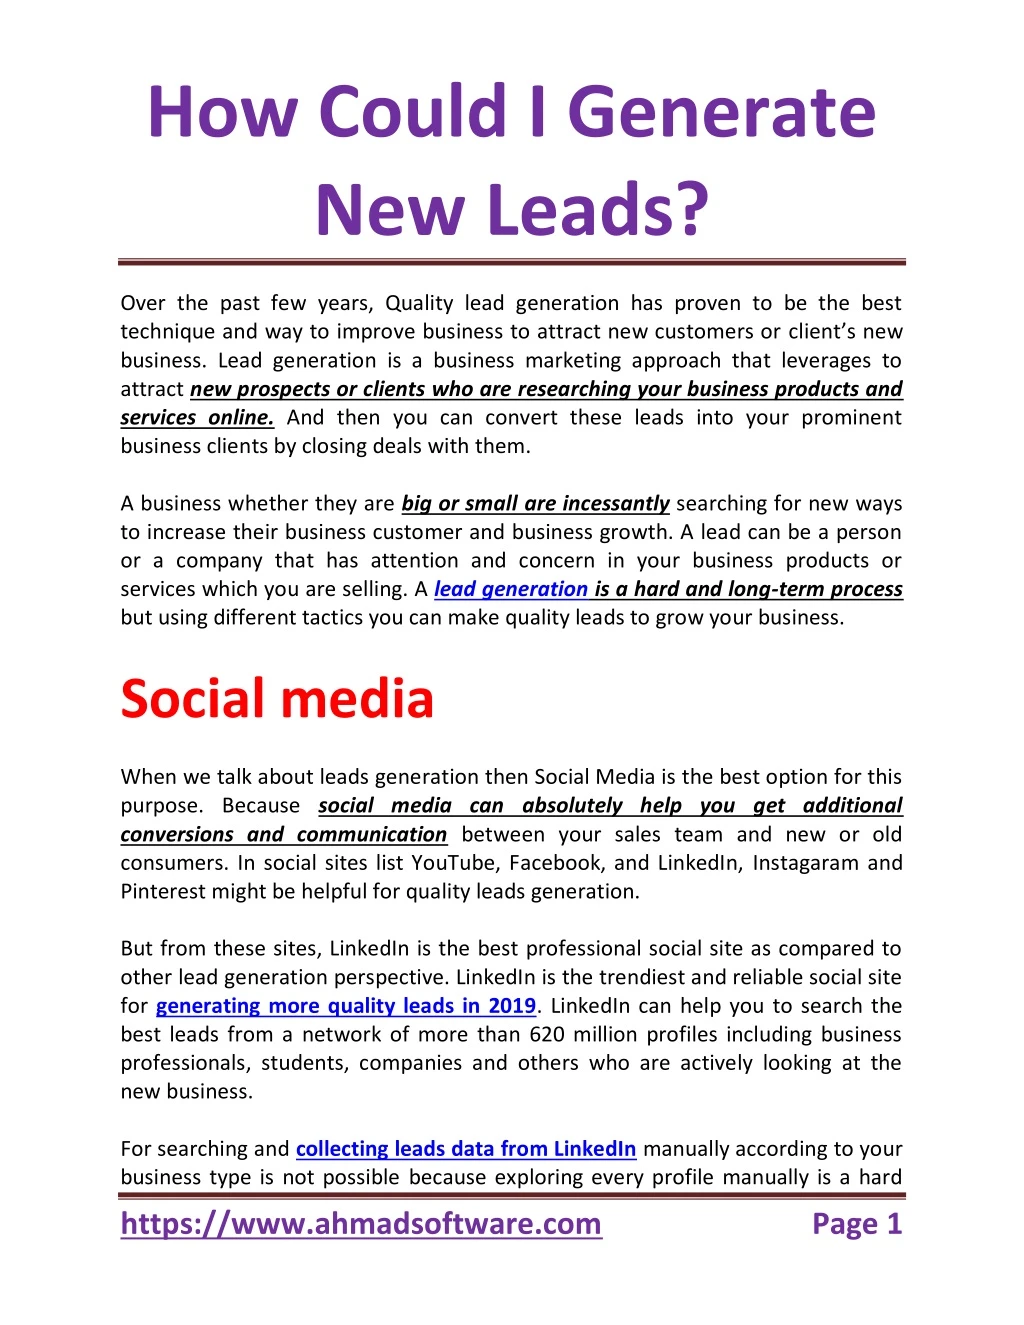 how could i generate new leads